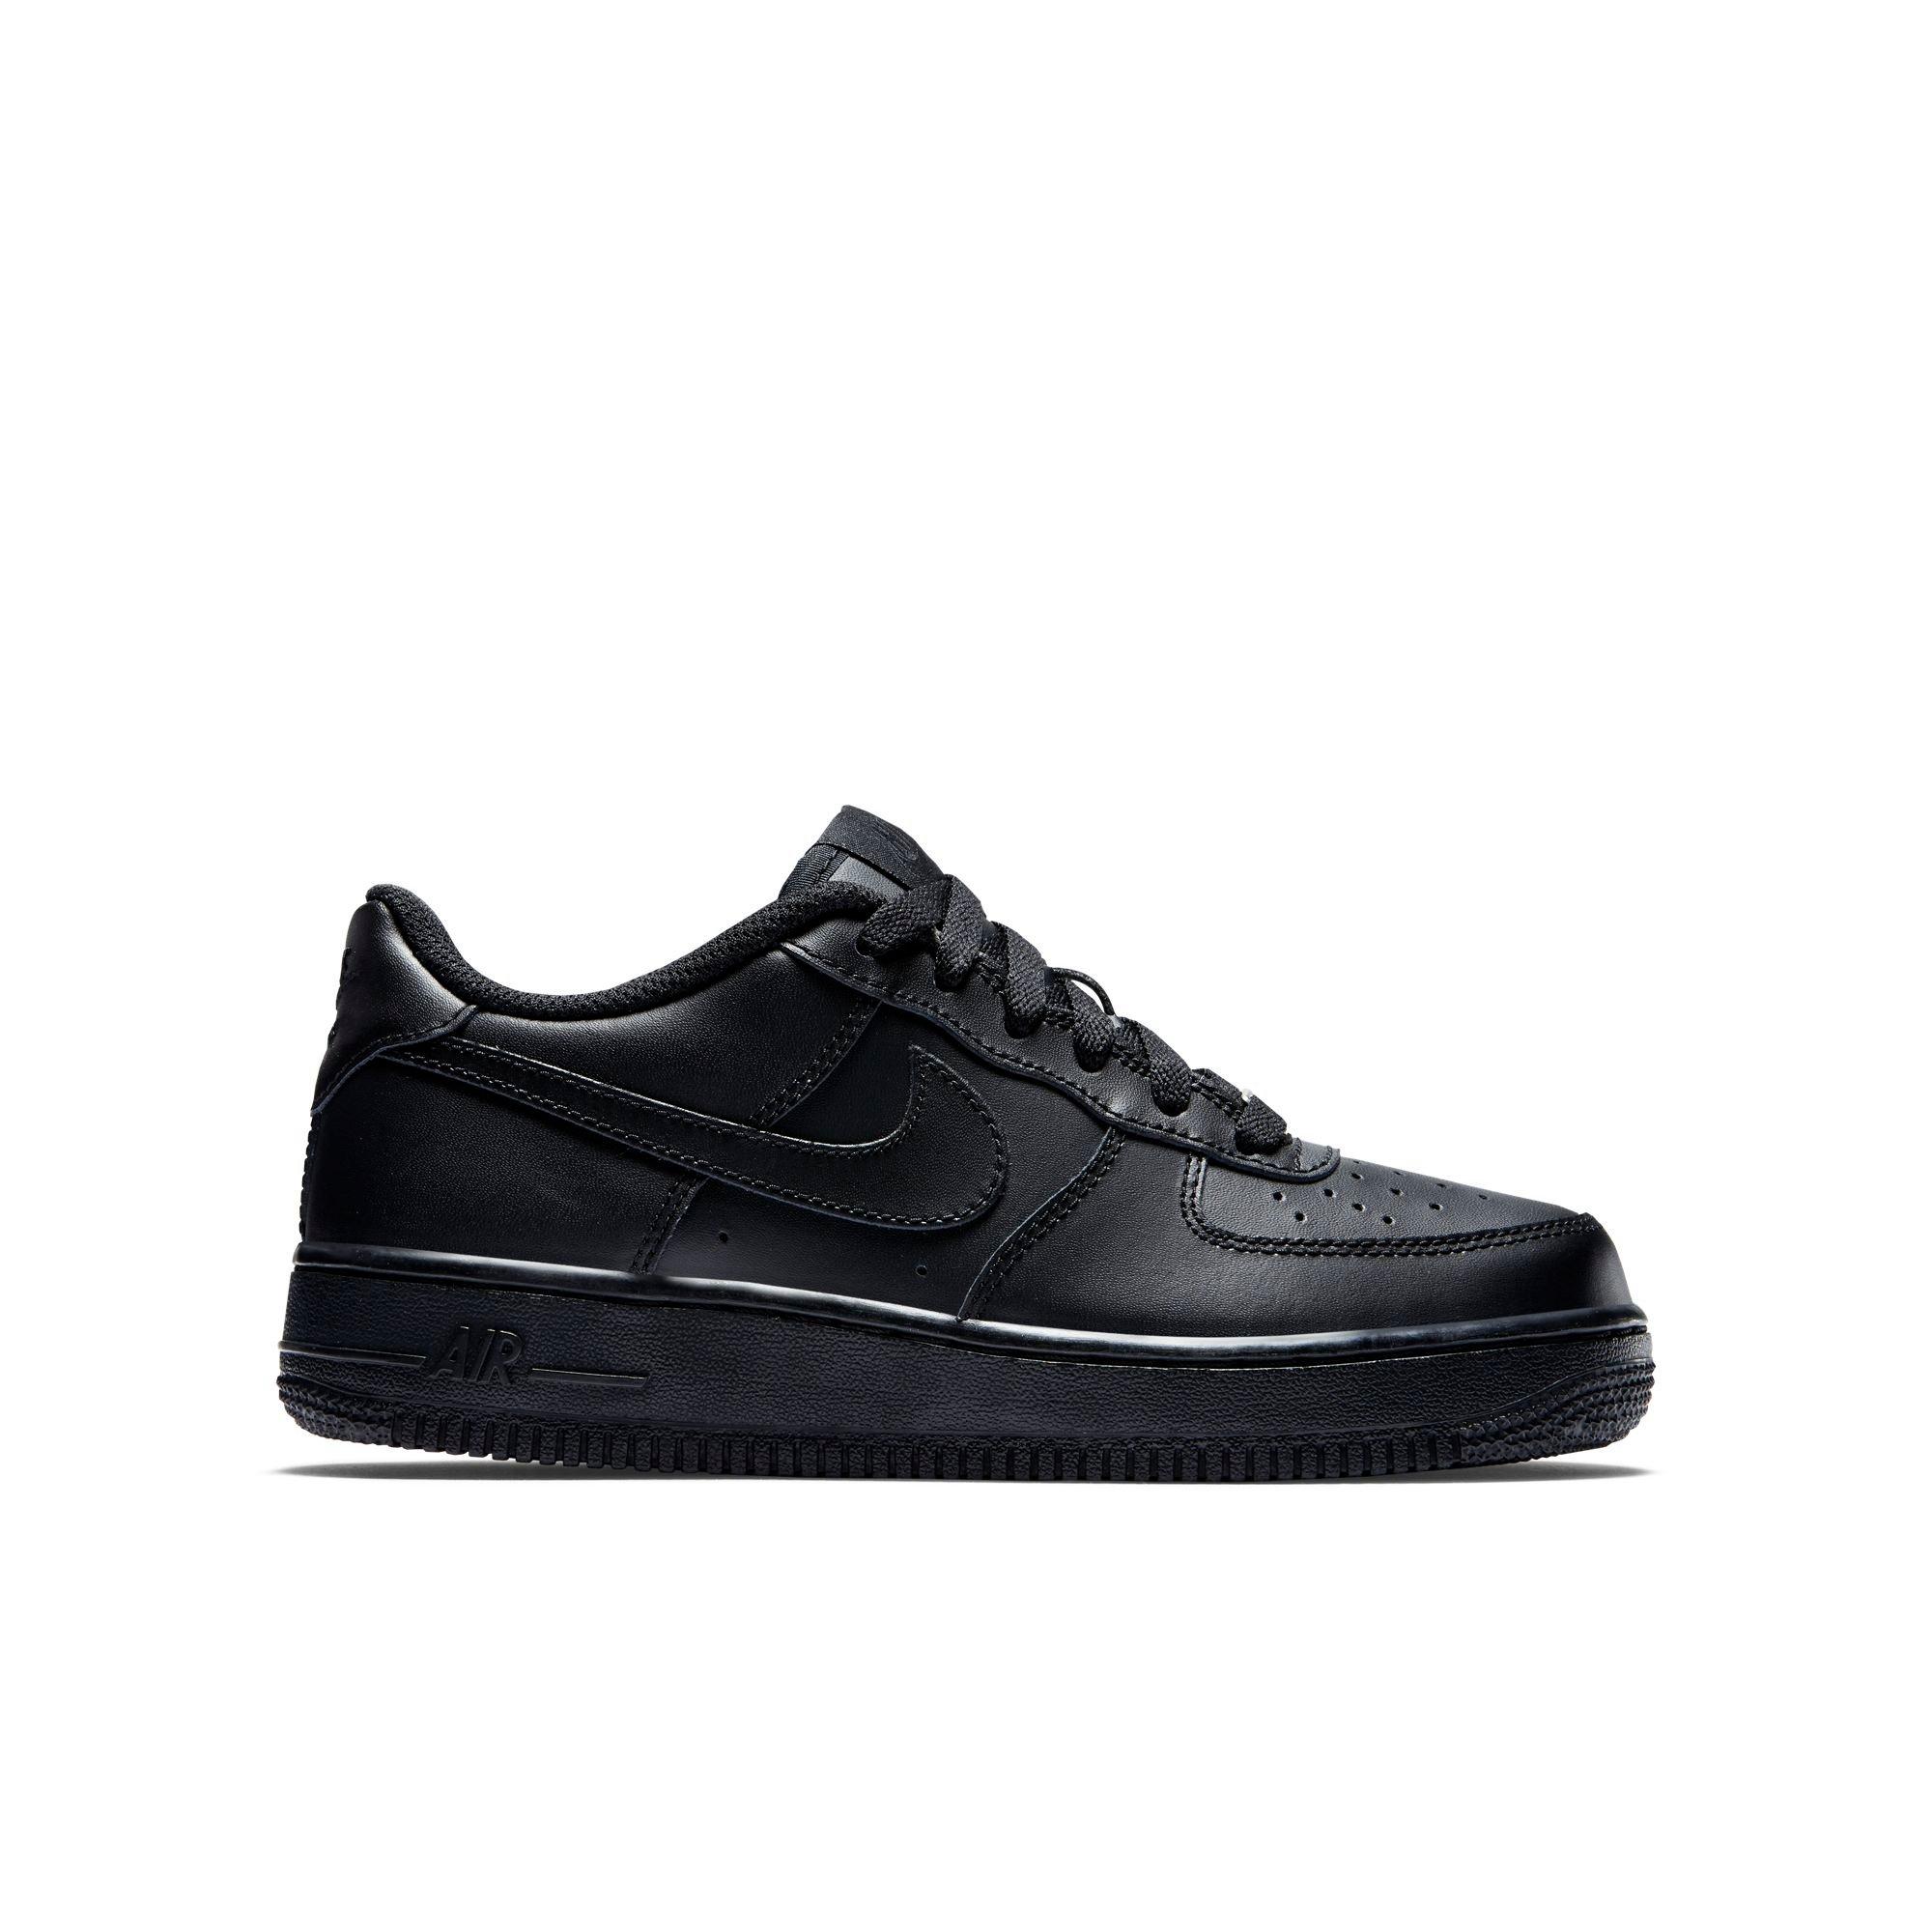 where do they sell air forces near me